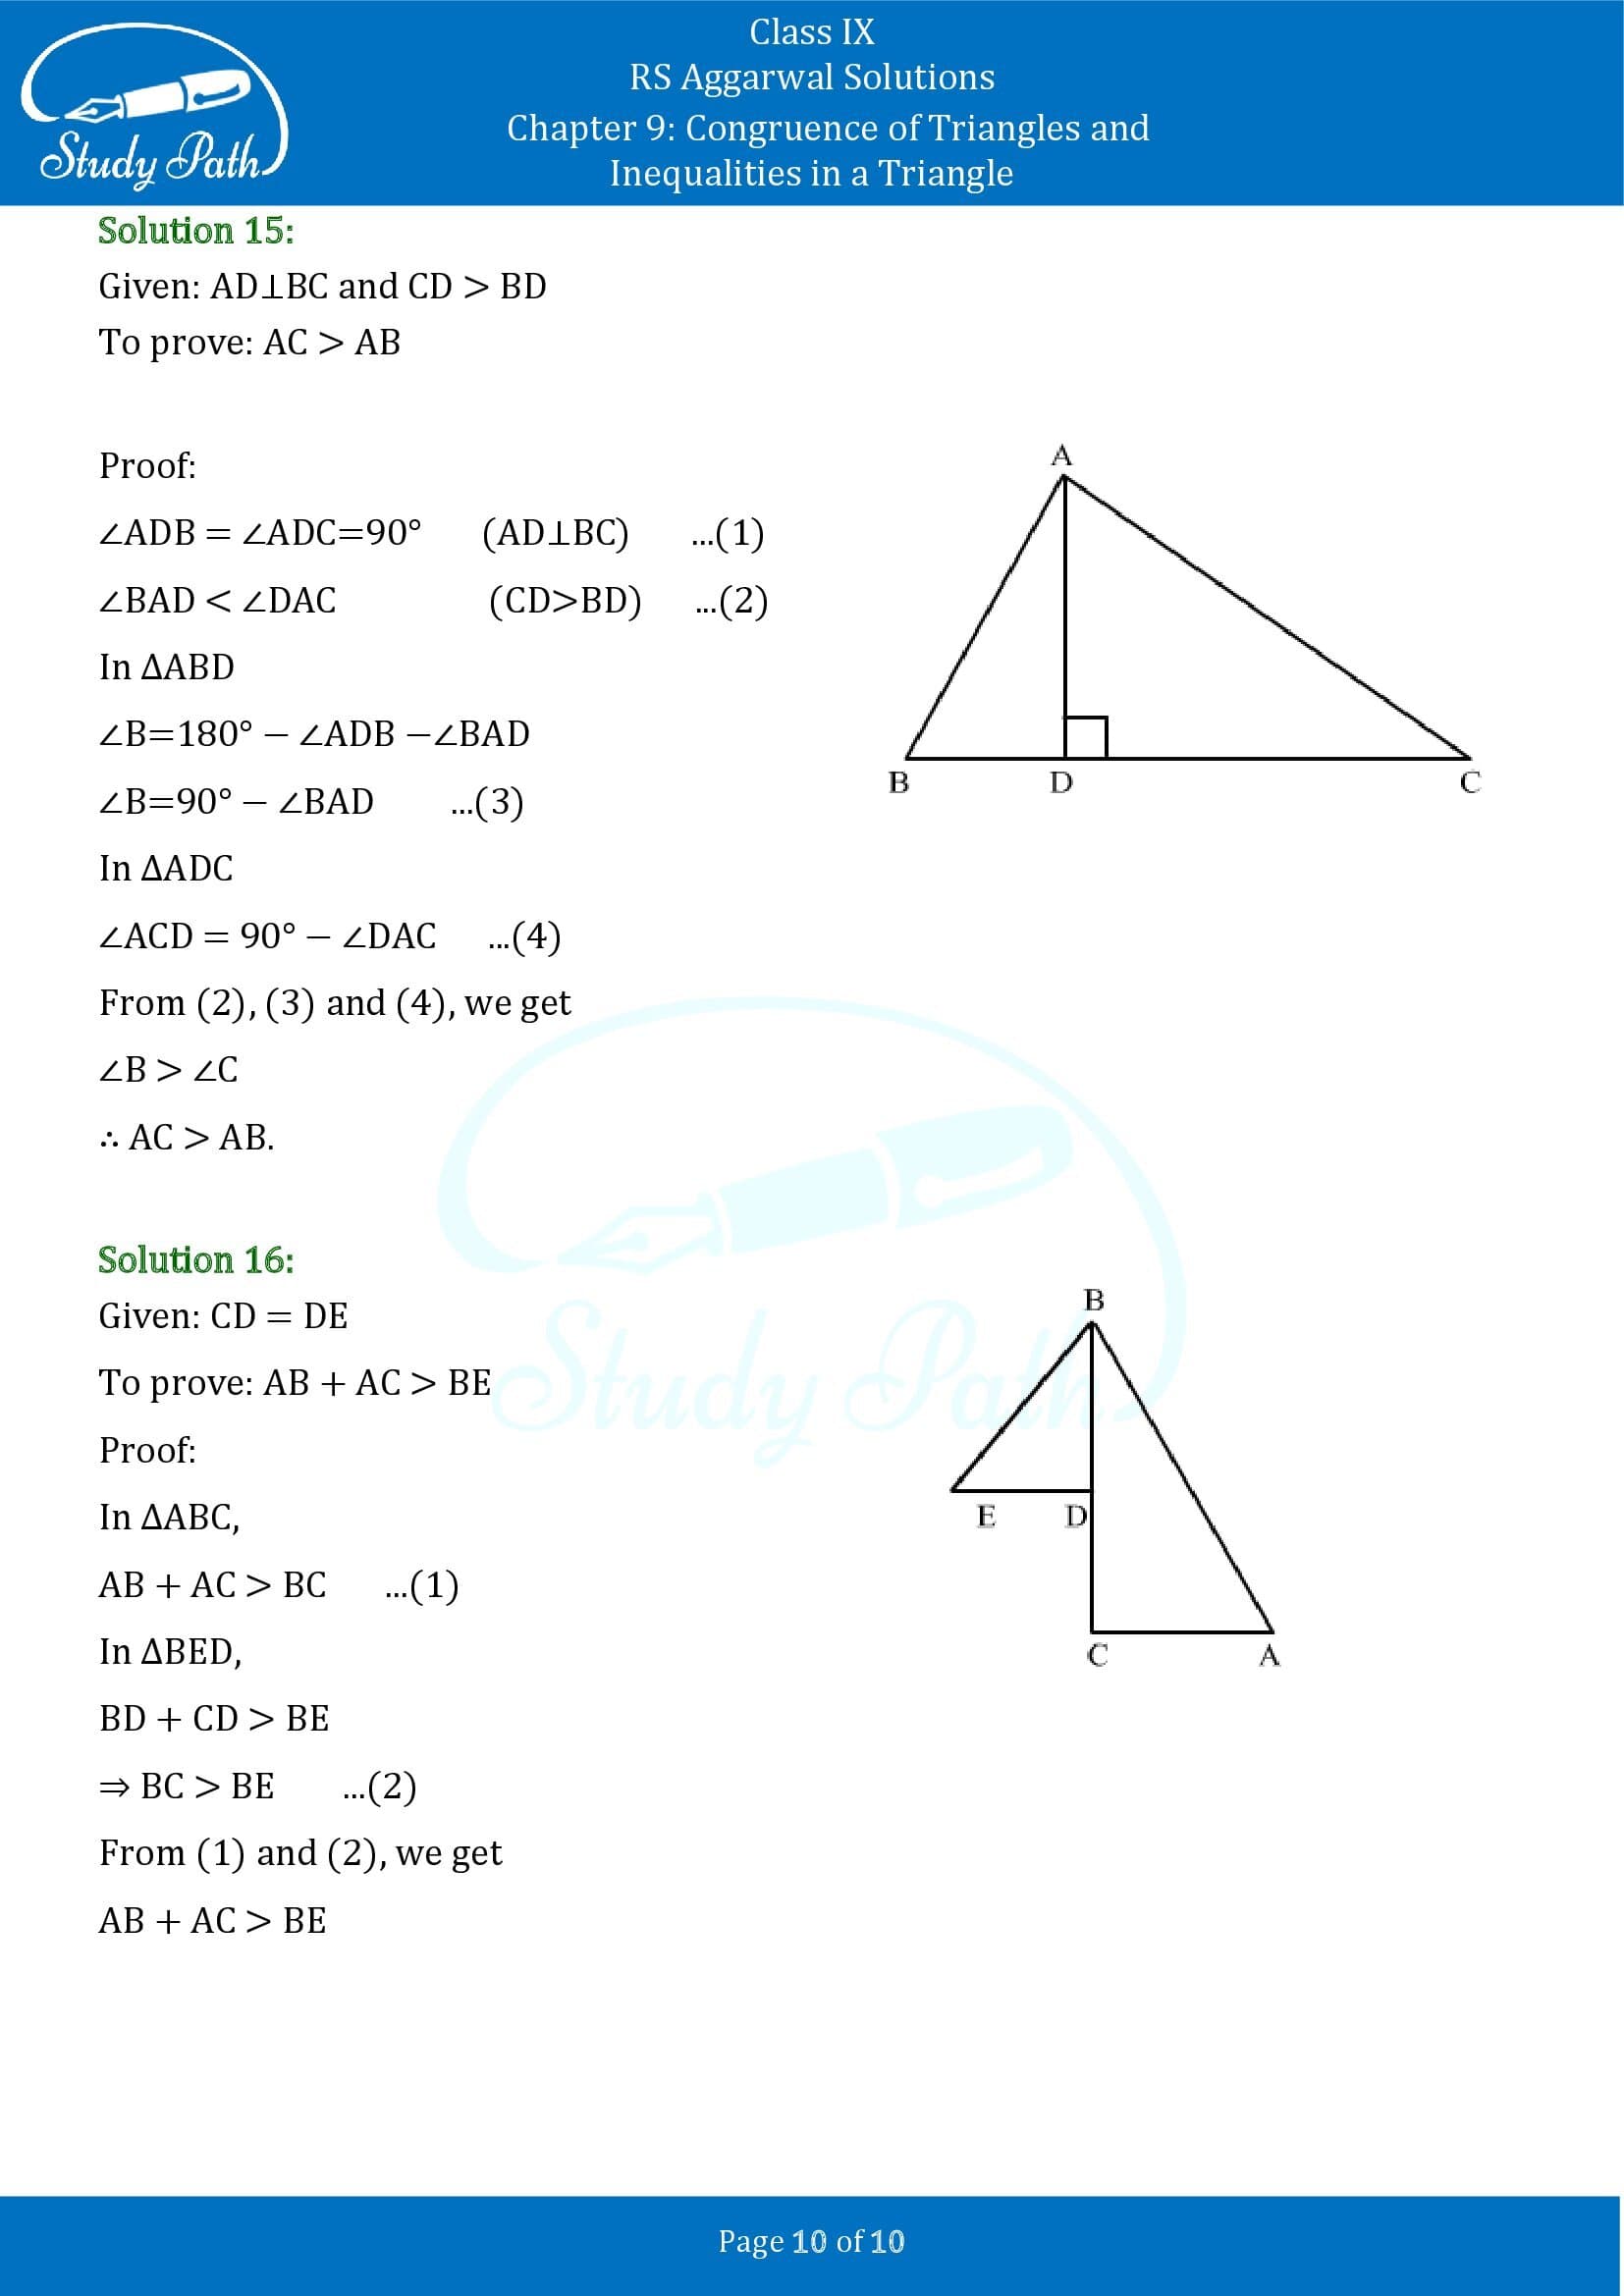 RS Aggarwal Solutions Class 9 Chapter 9 Congruence of Triangles and Inequalities in a Triangle Exercise 9B 0010